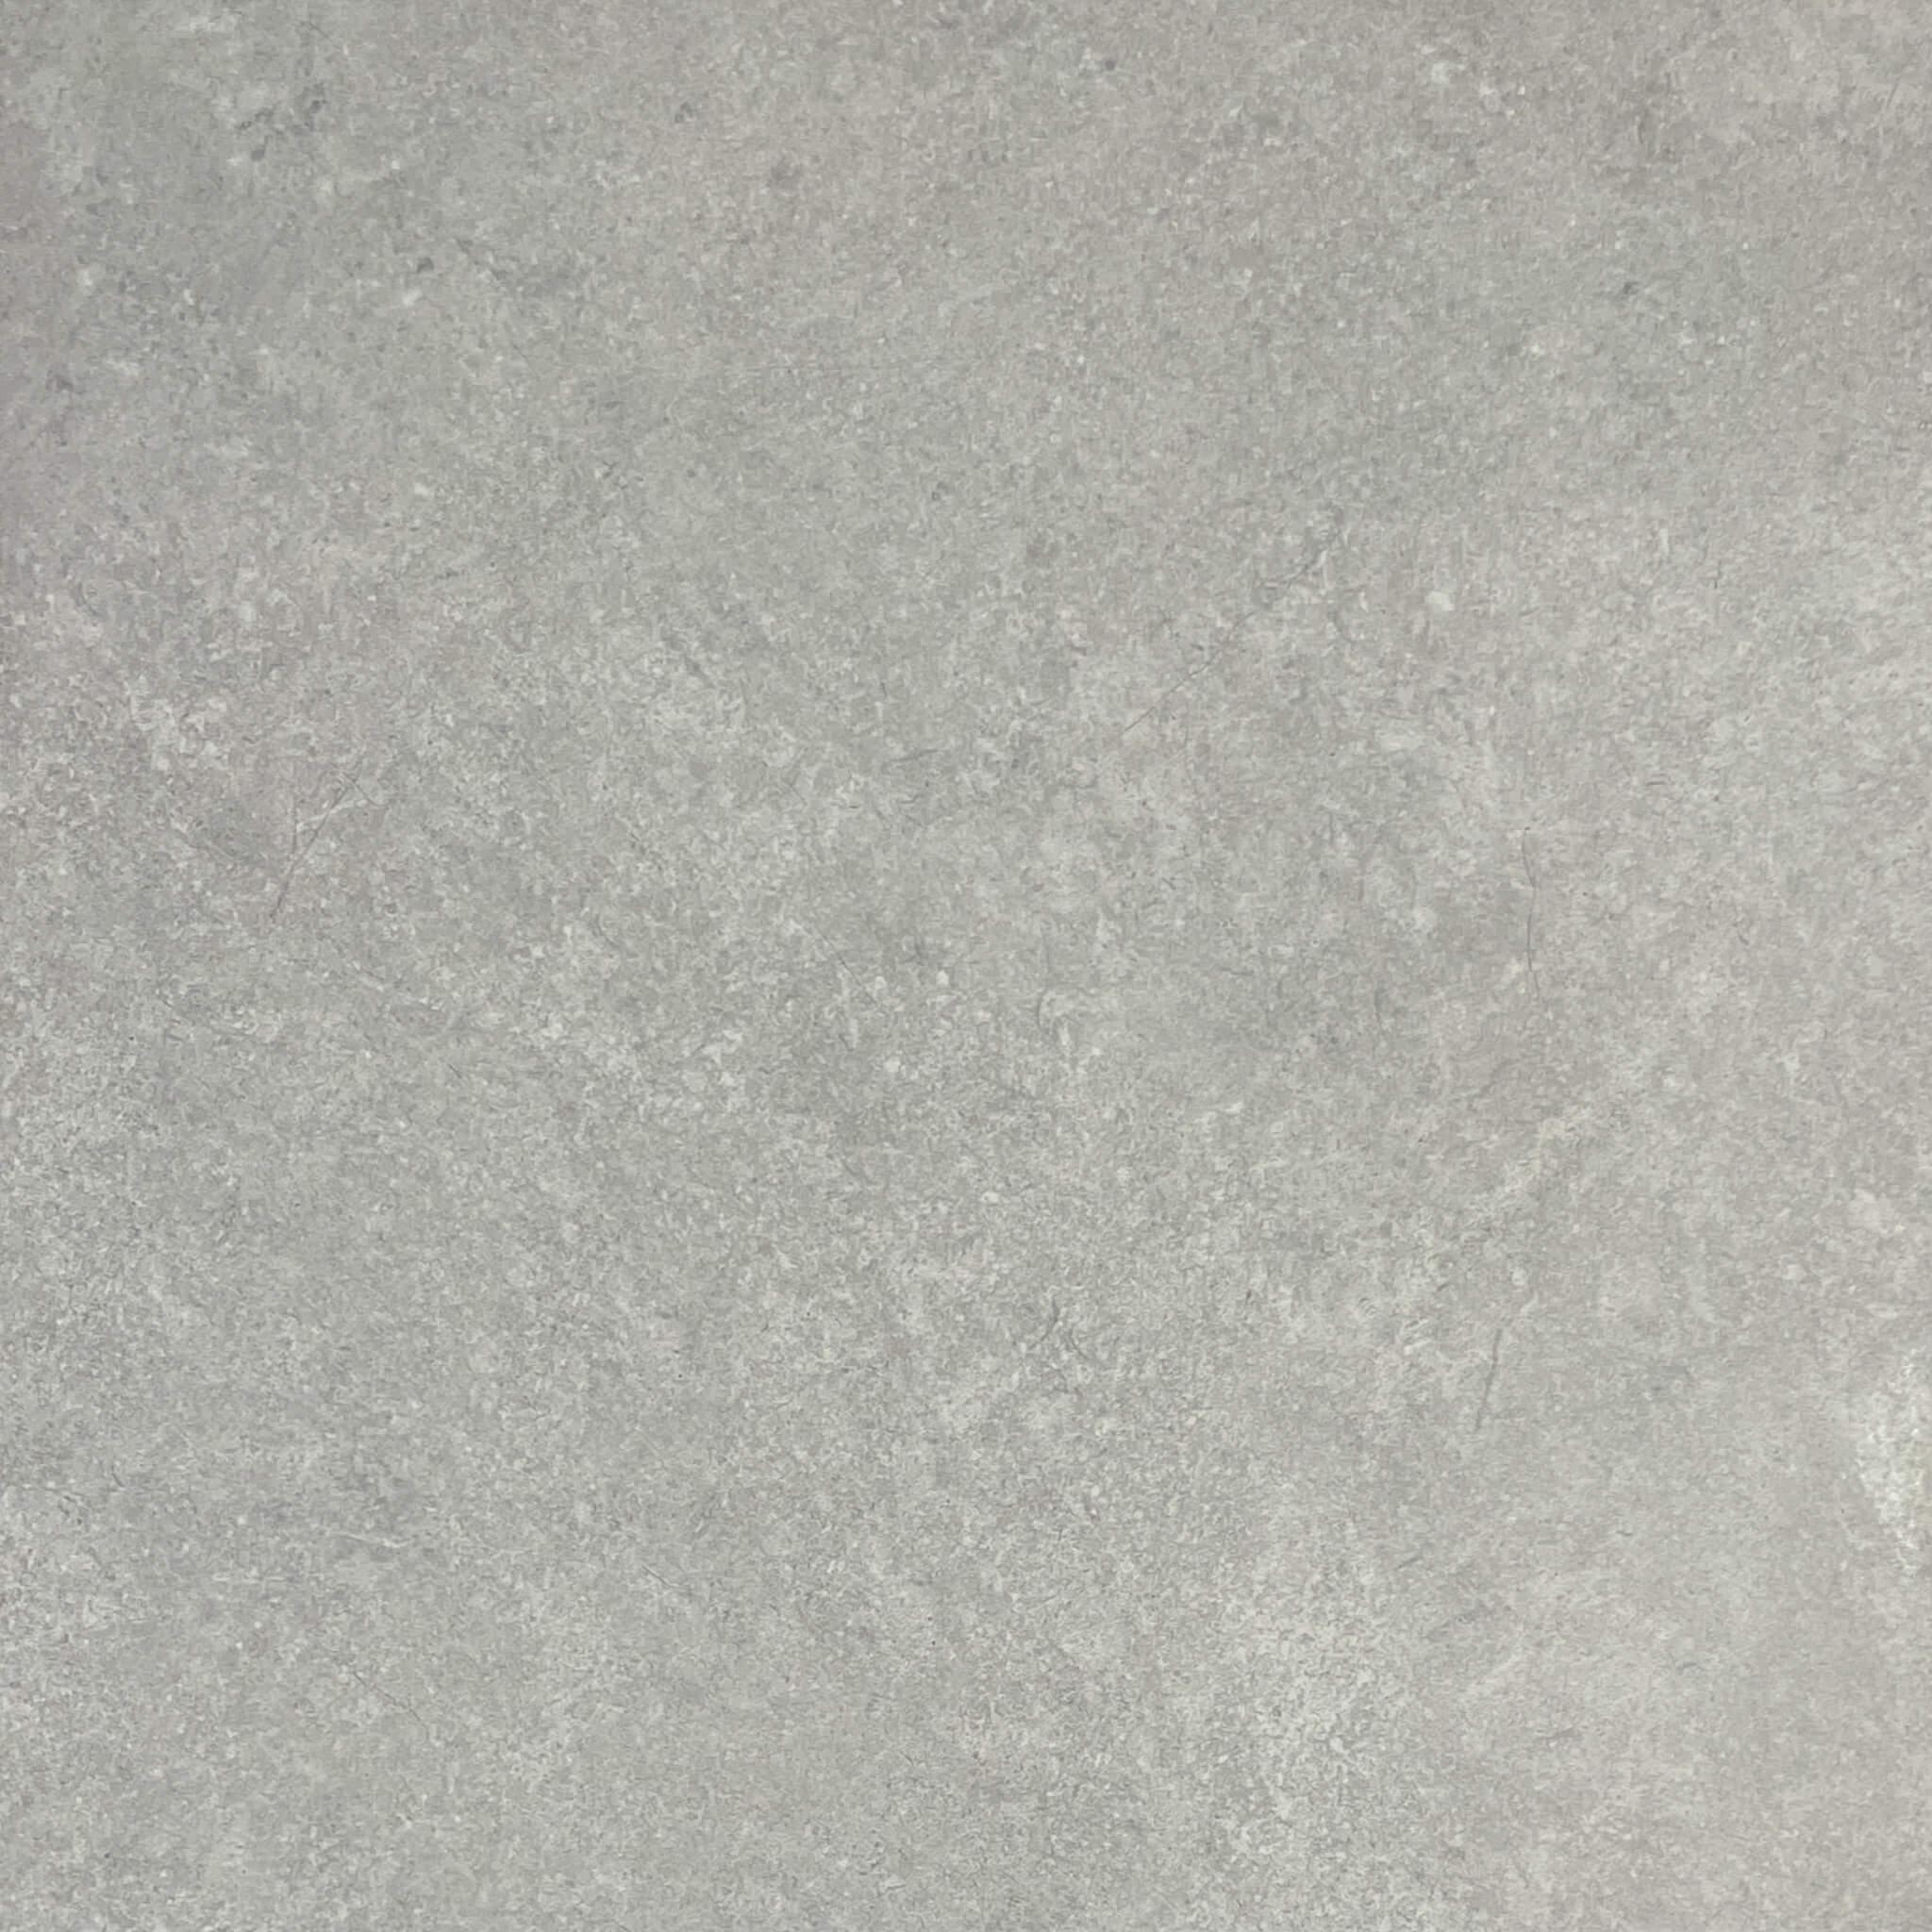 Eco Silver Lappato Rectified Italian Porcelain Tile 3406